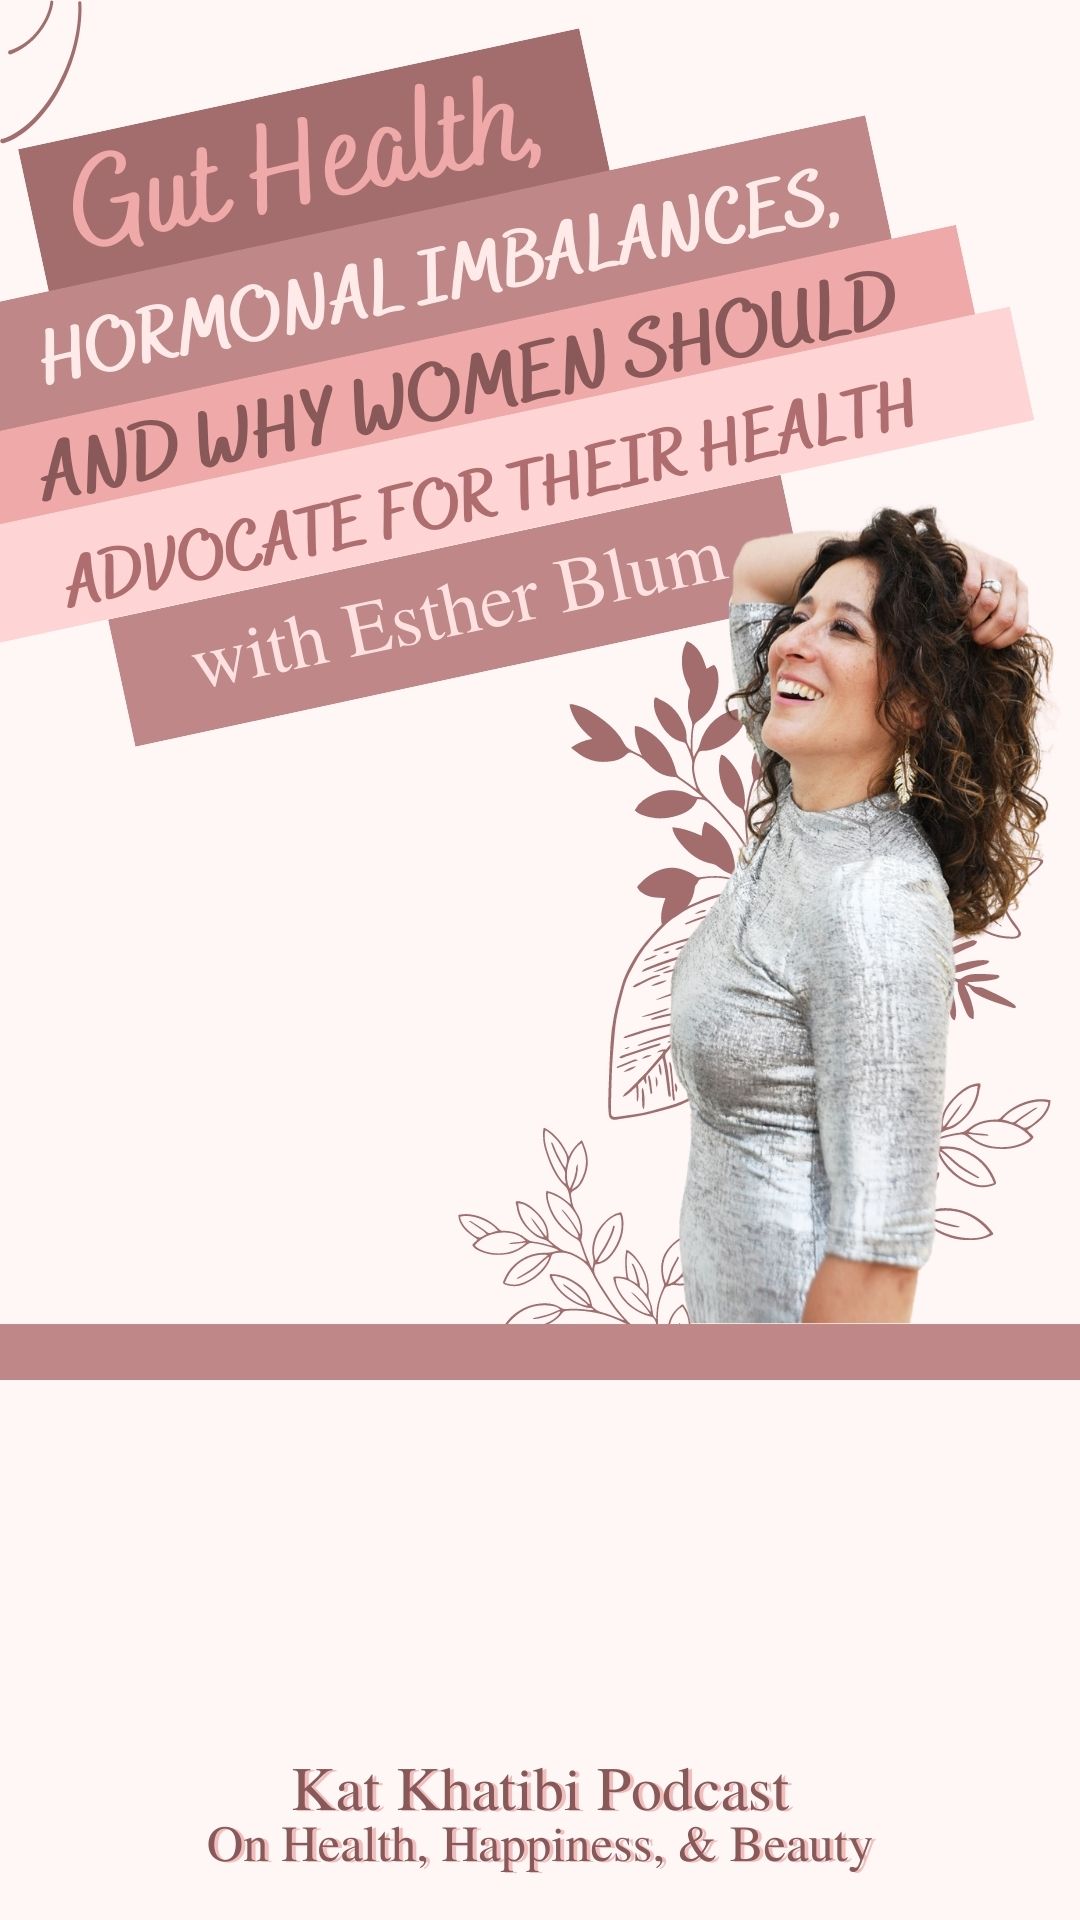 Gut Health, Hormonal Imbalances, and Why Women Should Advocate For Their Health with Esther Blum